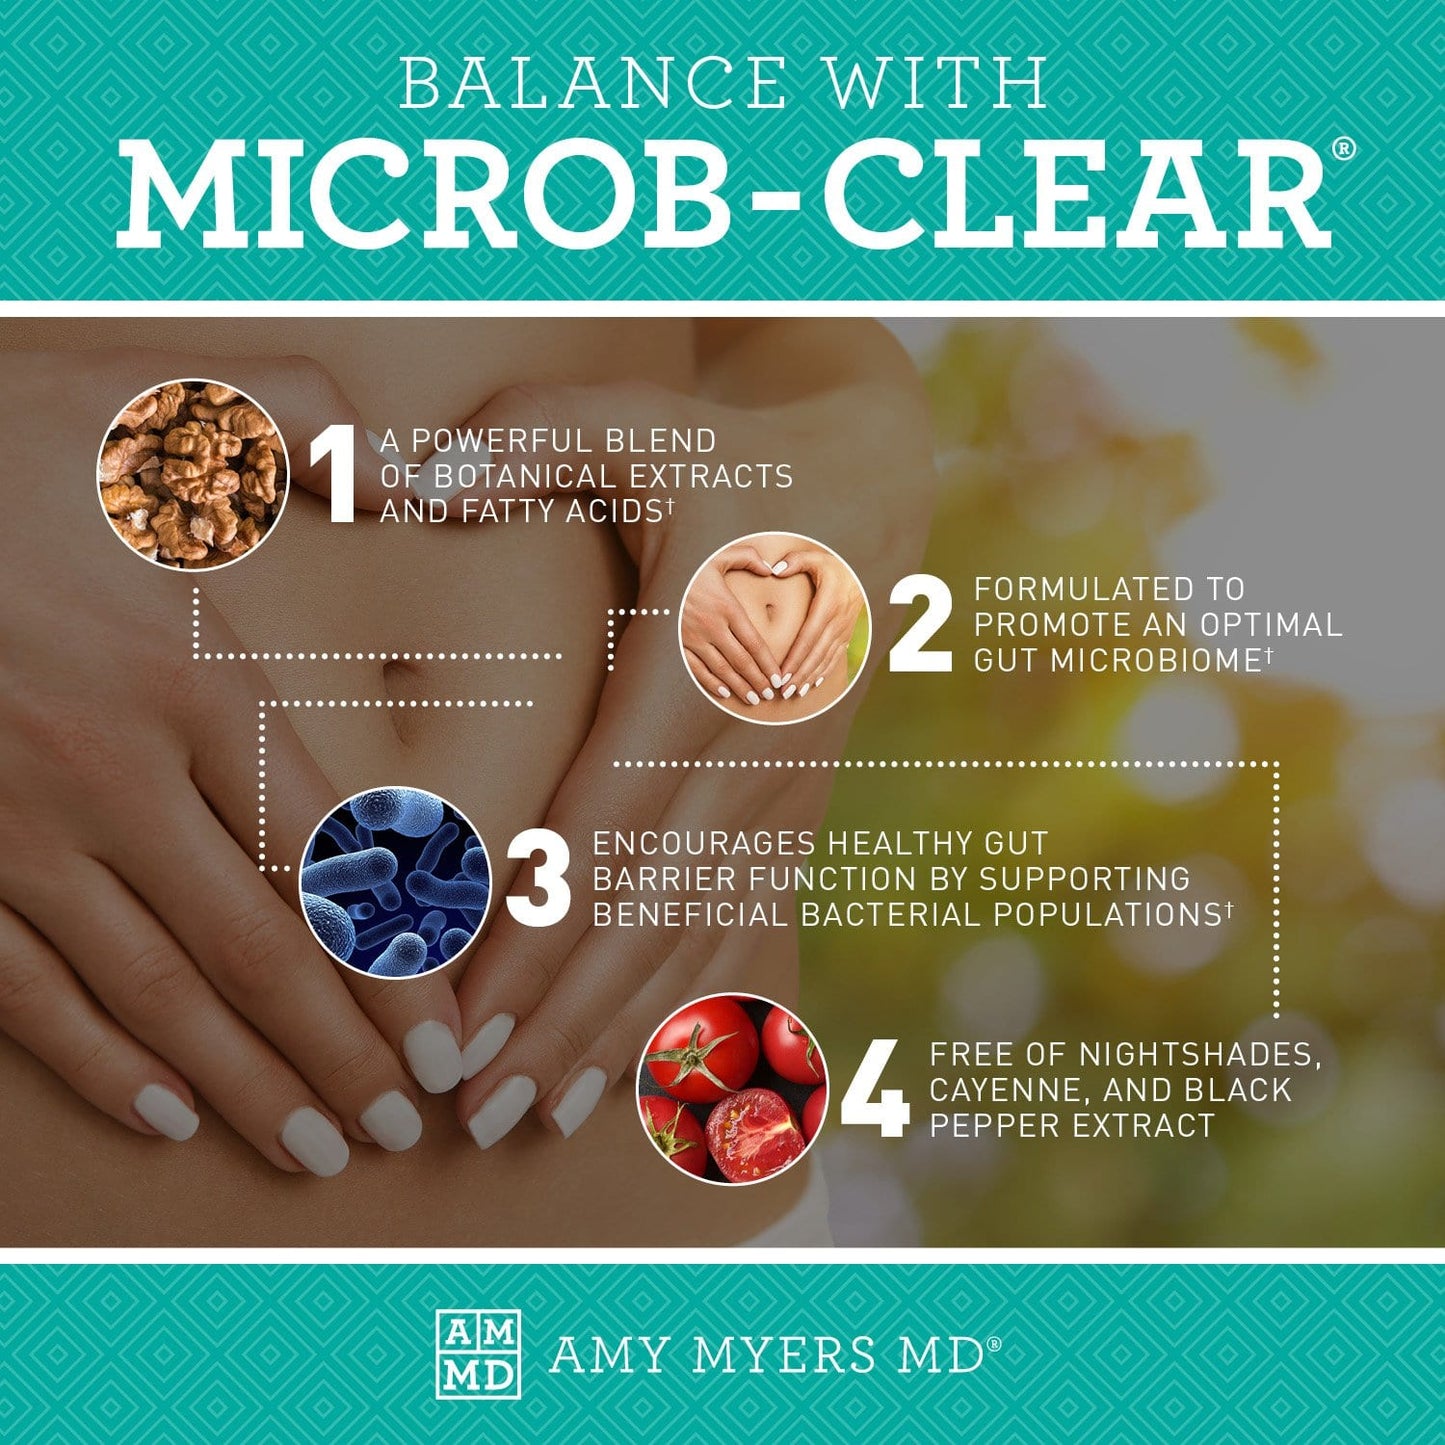 Microb-Clear by Amy Myers MD